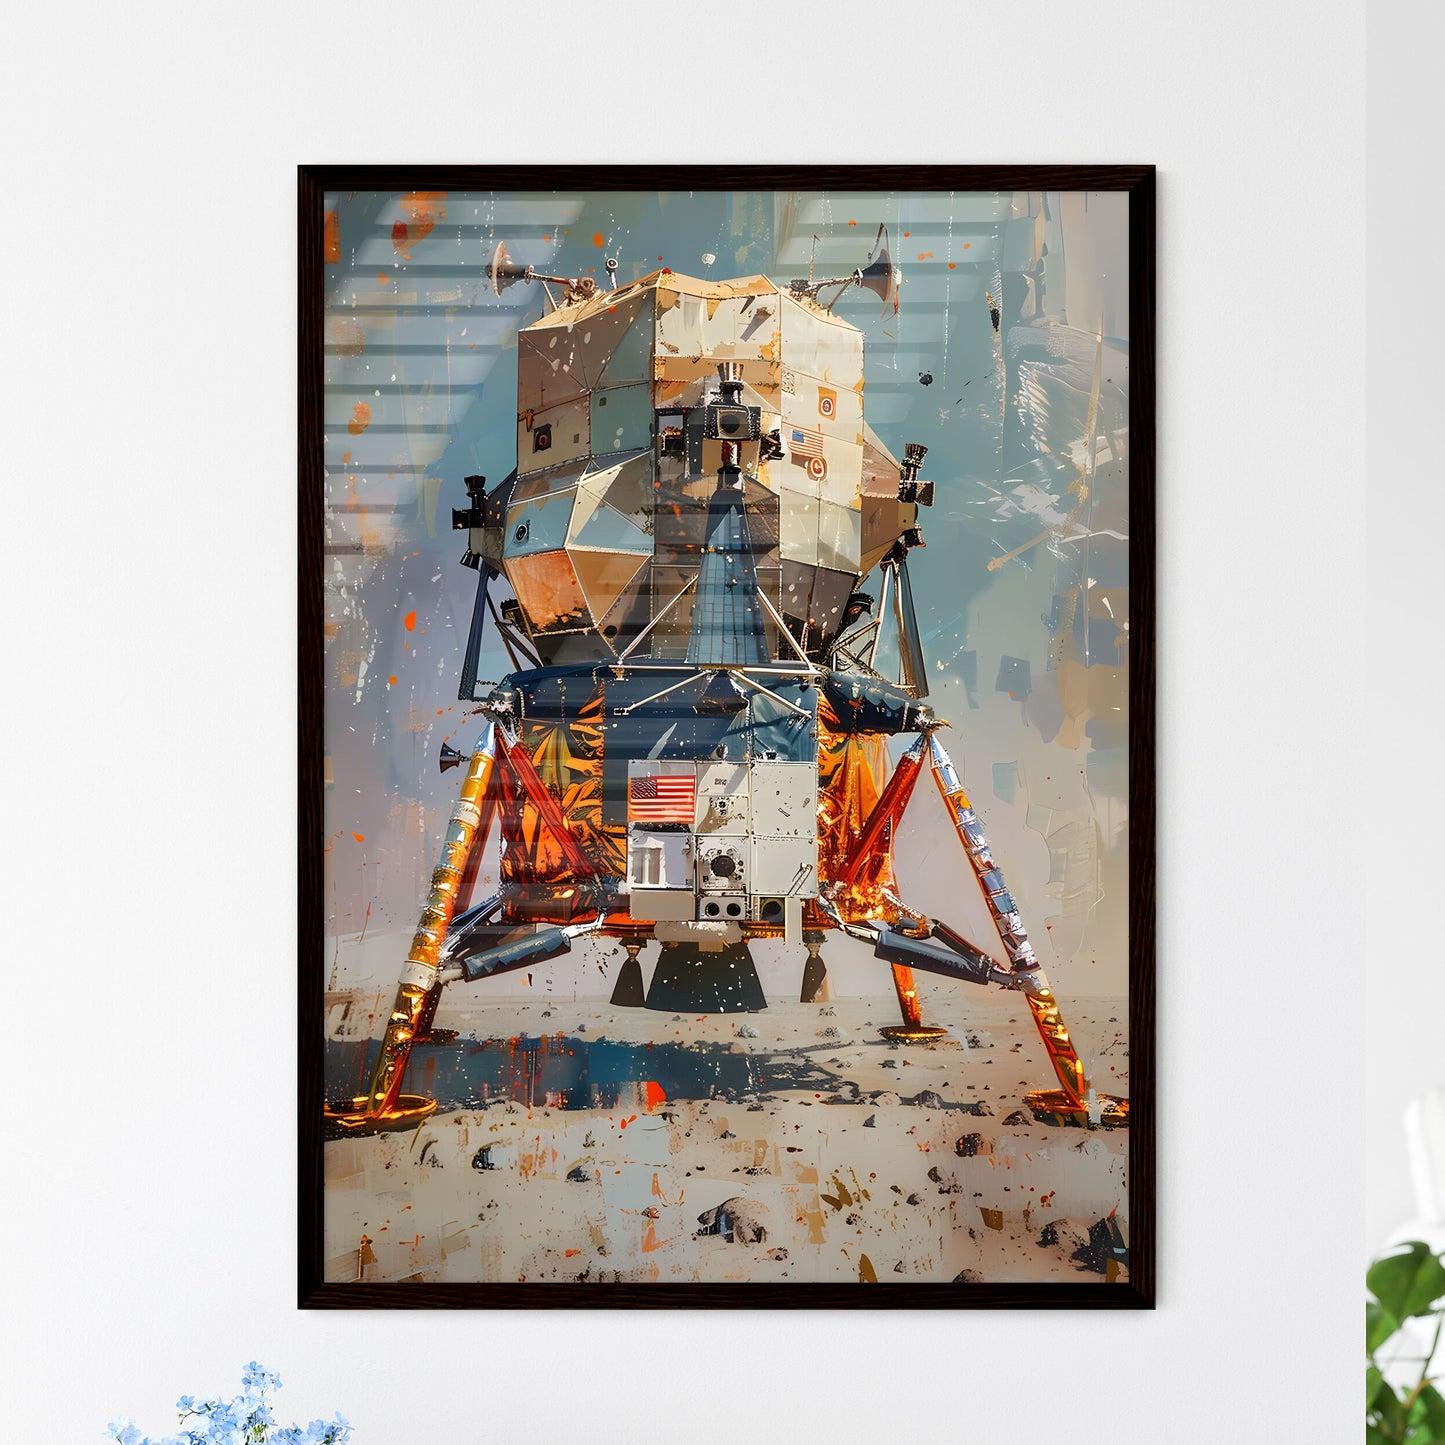 Impressionist Painting of Apollo Lunar Module Liftoff at Dawn on the Moon in 1969 Default Title